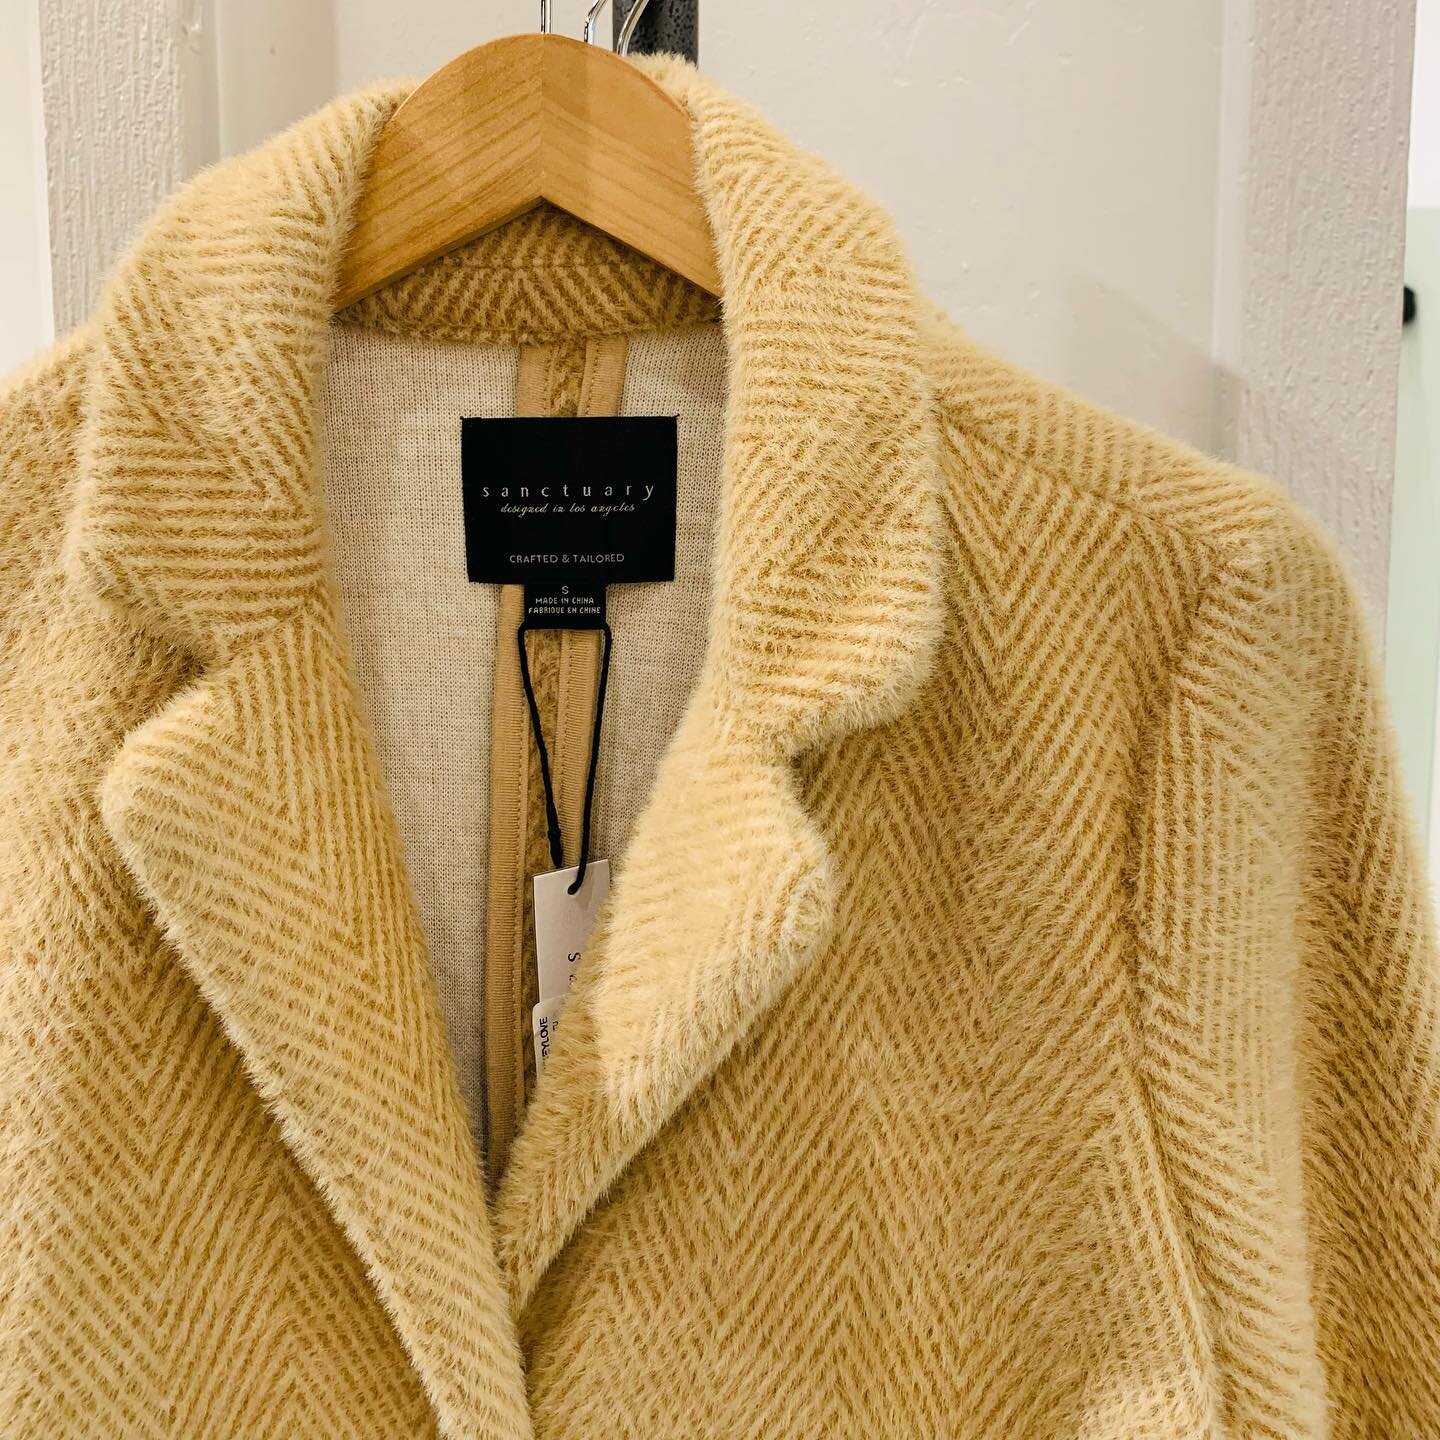 This coat! It&rsquo;s mid thigh and the best combo between loungy and dressy. And&hellip;.oh&hellip;.so&hellip;.soft!

Open 11am-6pm daily.

#mountaintownlife #adventurealways#visitmccall #shoppinginmccall #mccallidaho #shoplocal #lounge #lounging #s